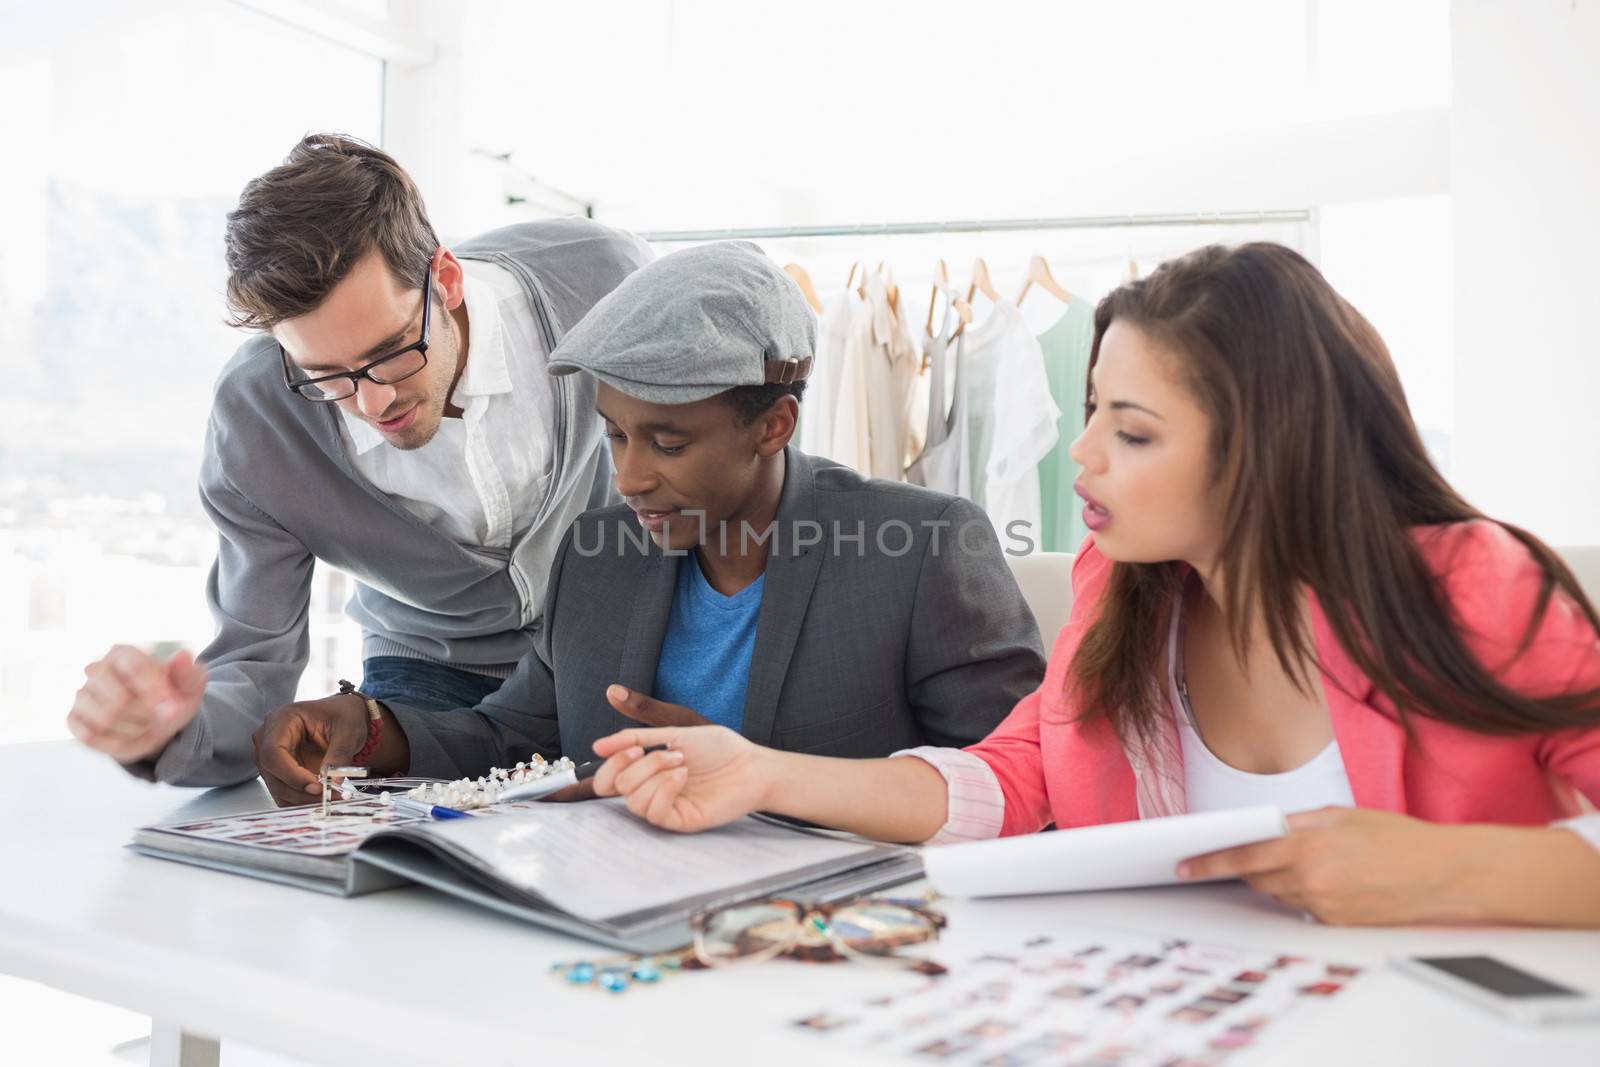 Group of fashion designers discussing designs in a studio